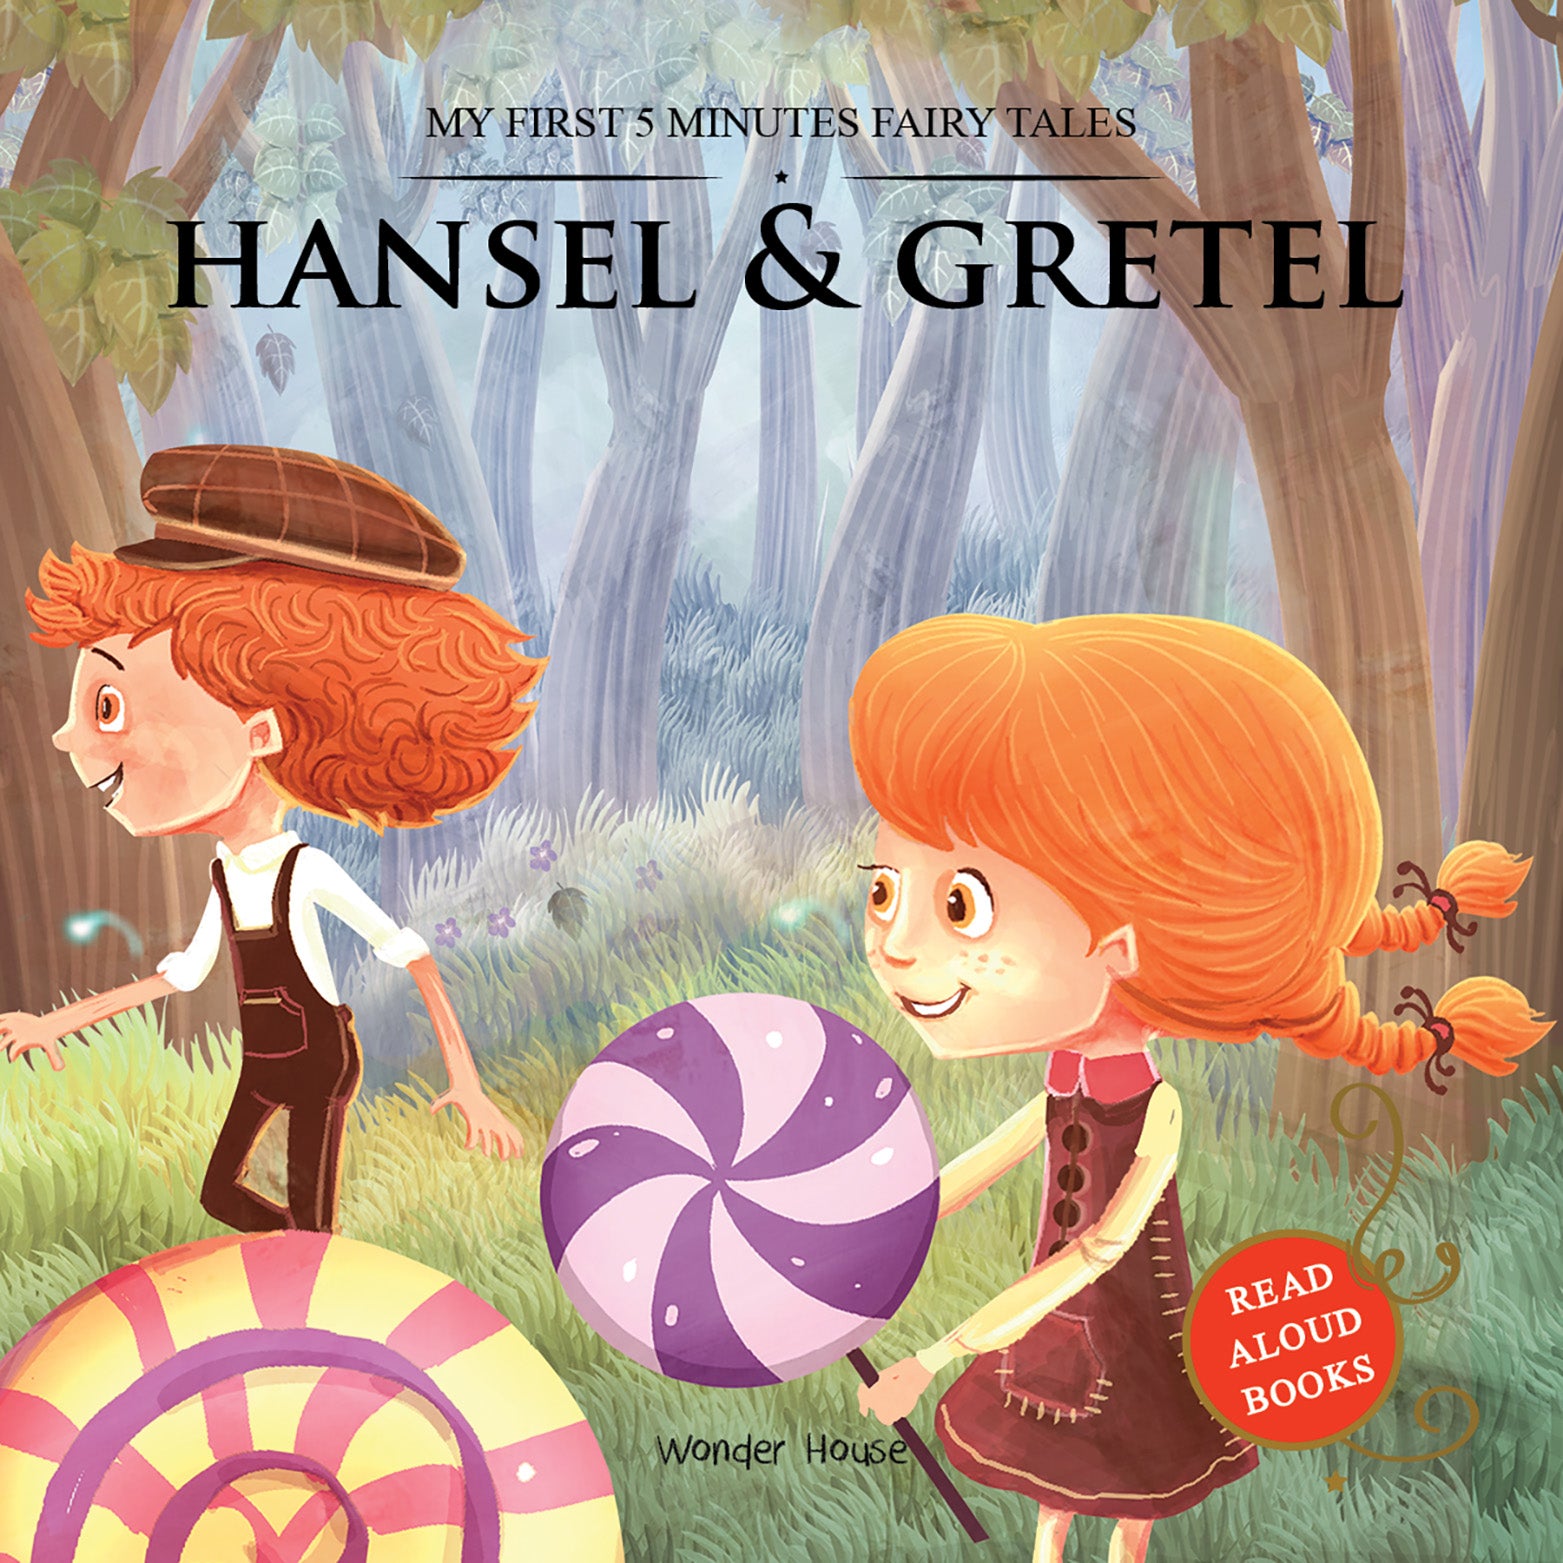 My First 5 Minutes Fairy Tales Hansel and Gretel: Traditional Fairy Tales For Children (Abridged and Retold)